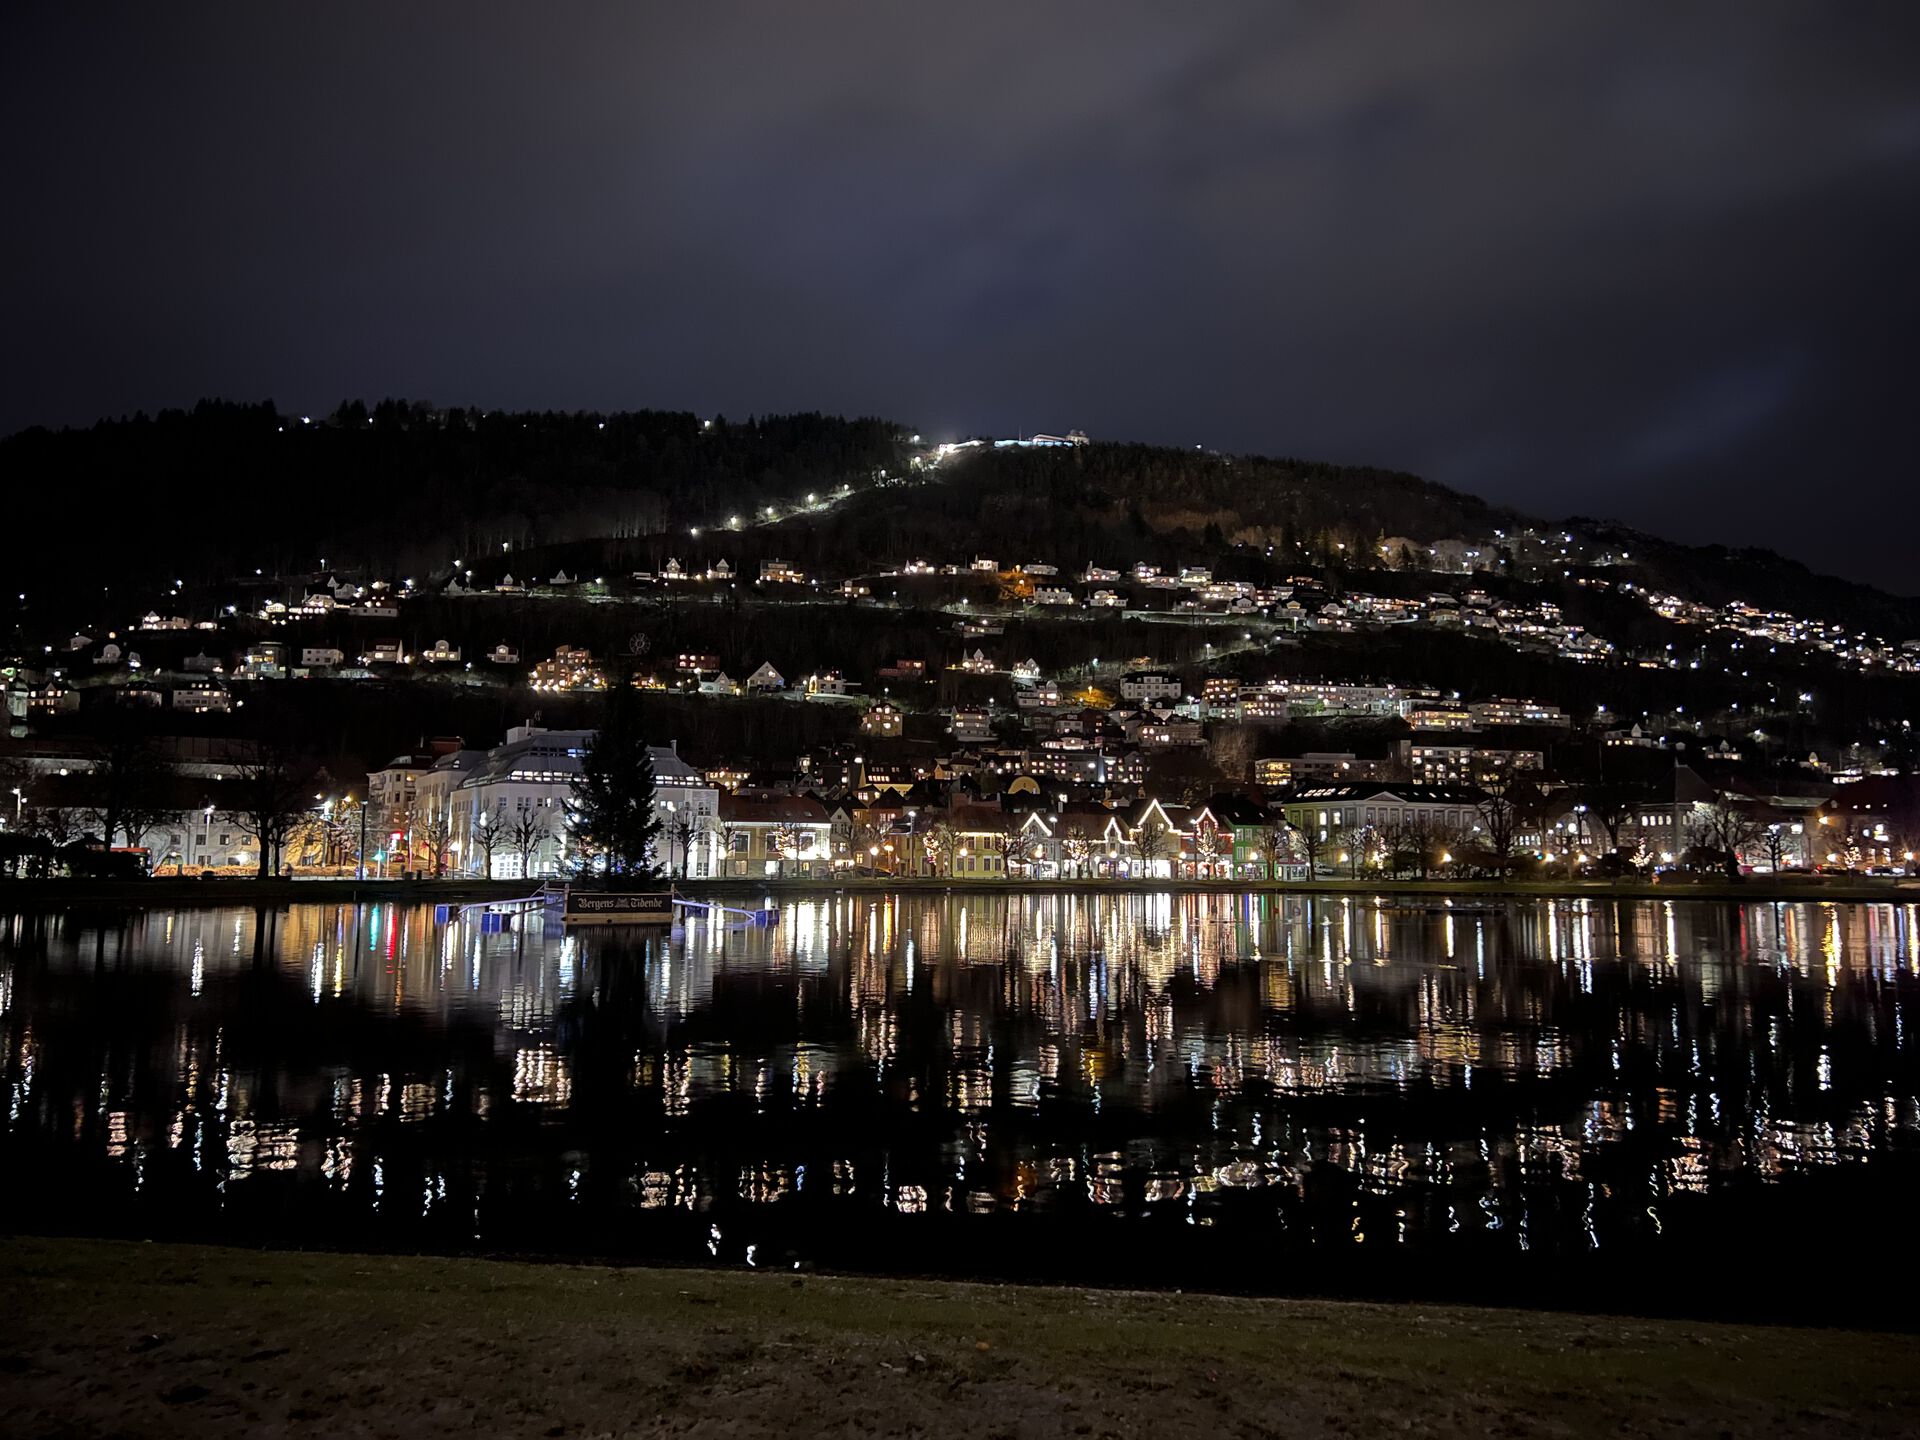 Photo of the city lake in Bergen, with reflections of the lights from the buildings around it